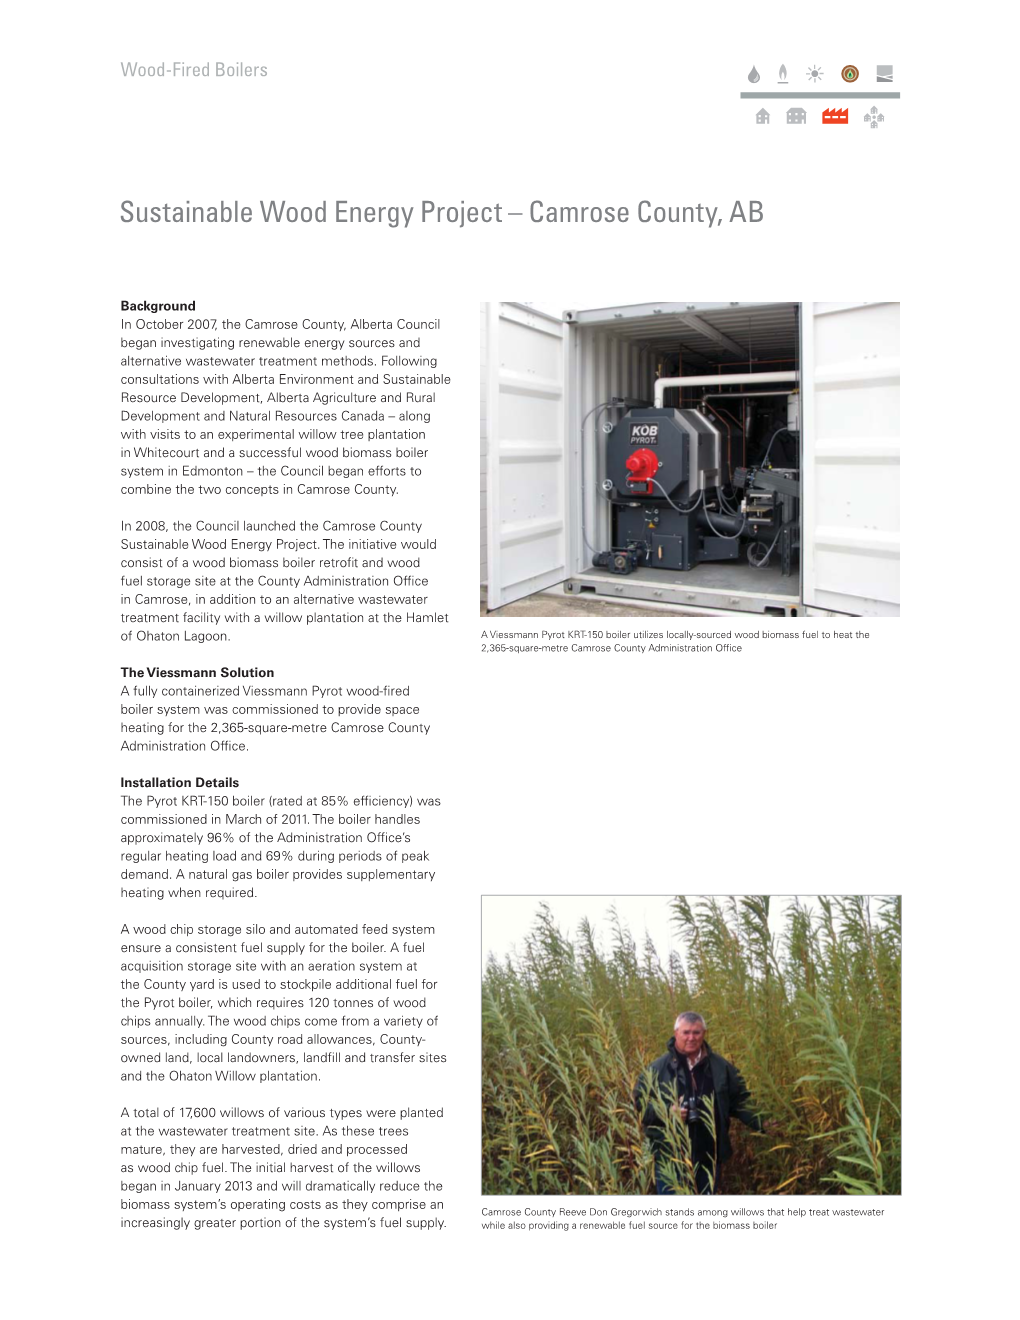 Camrose County Biomass Reference.Indd